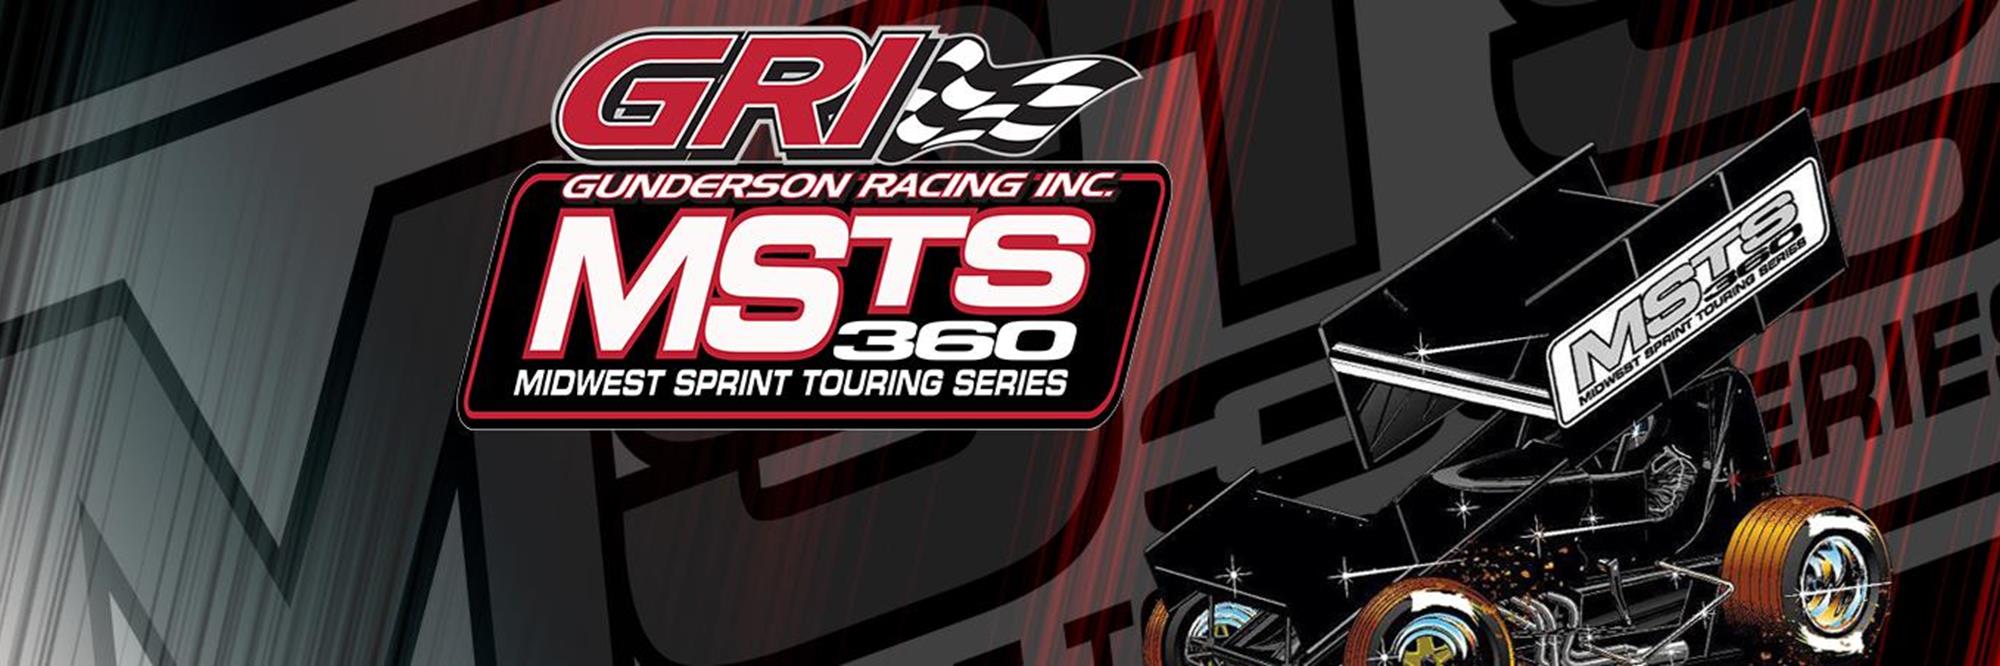 MSTS 360 Midwest Sprint Touring Series